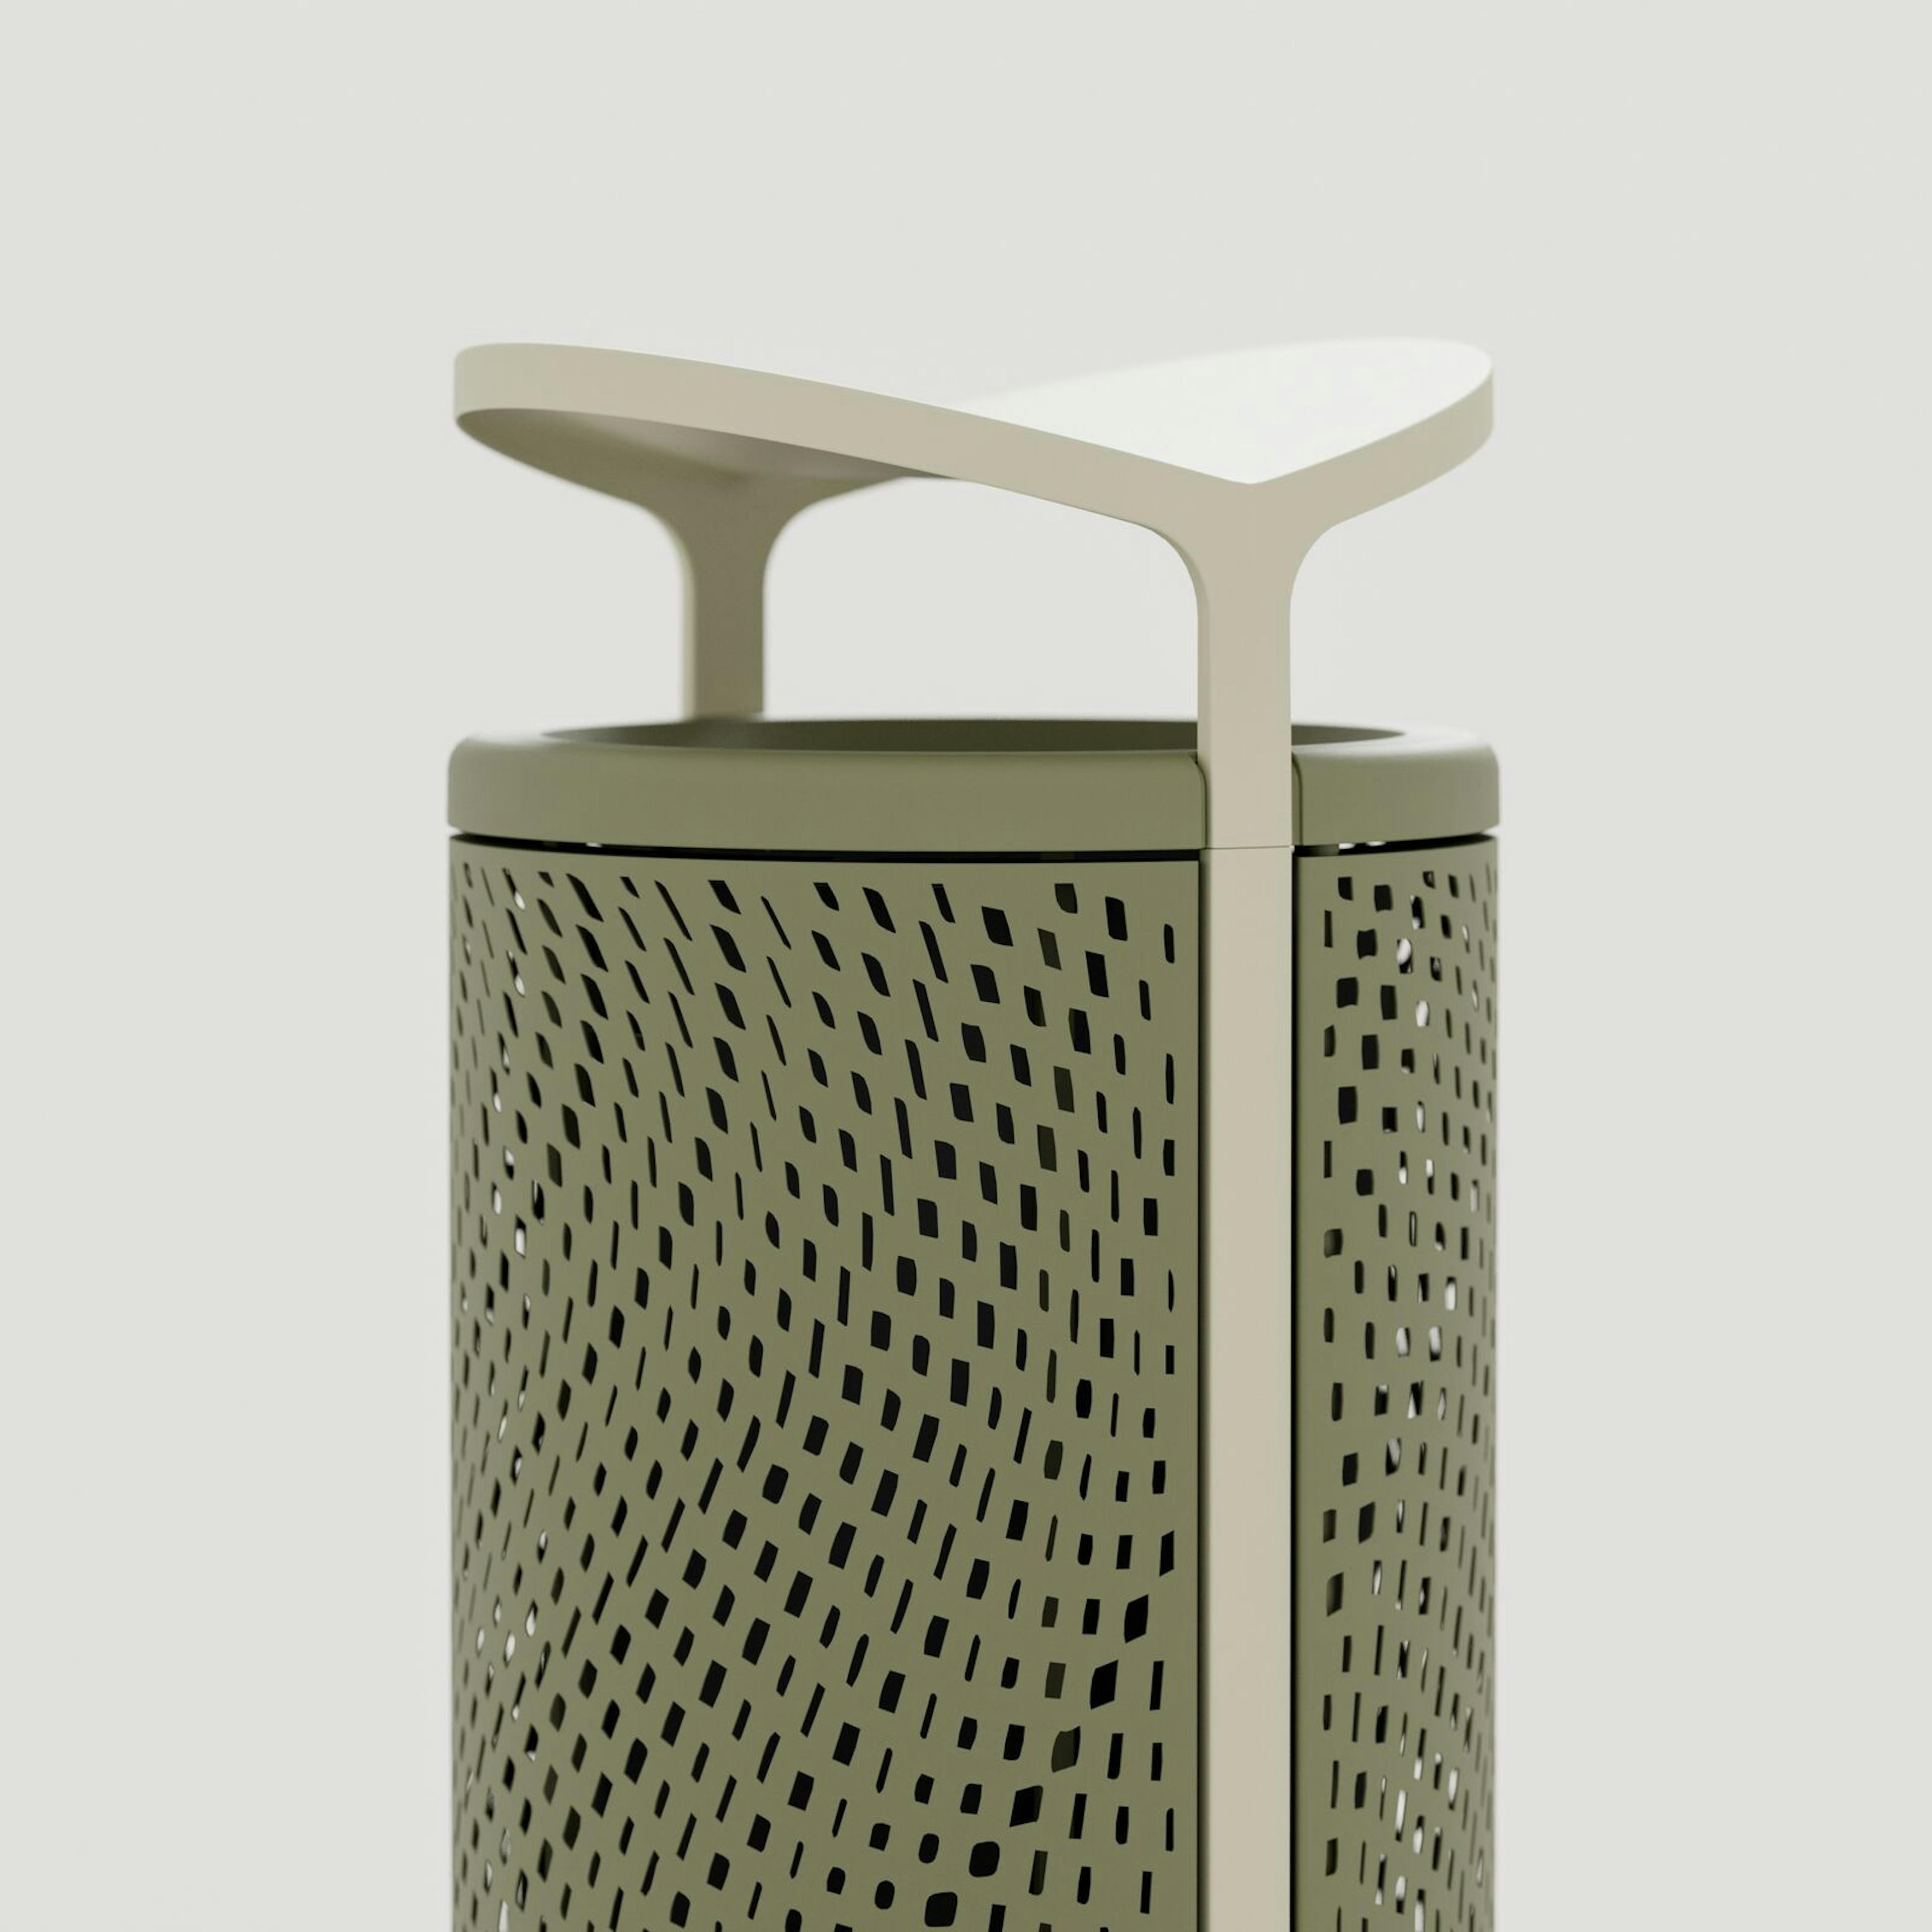 Tonyo Litter & Recycling Receptacle: Lichen Texture + Olive Texture 